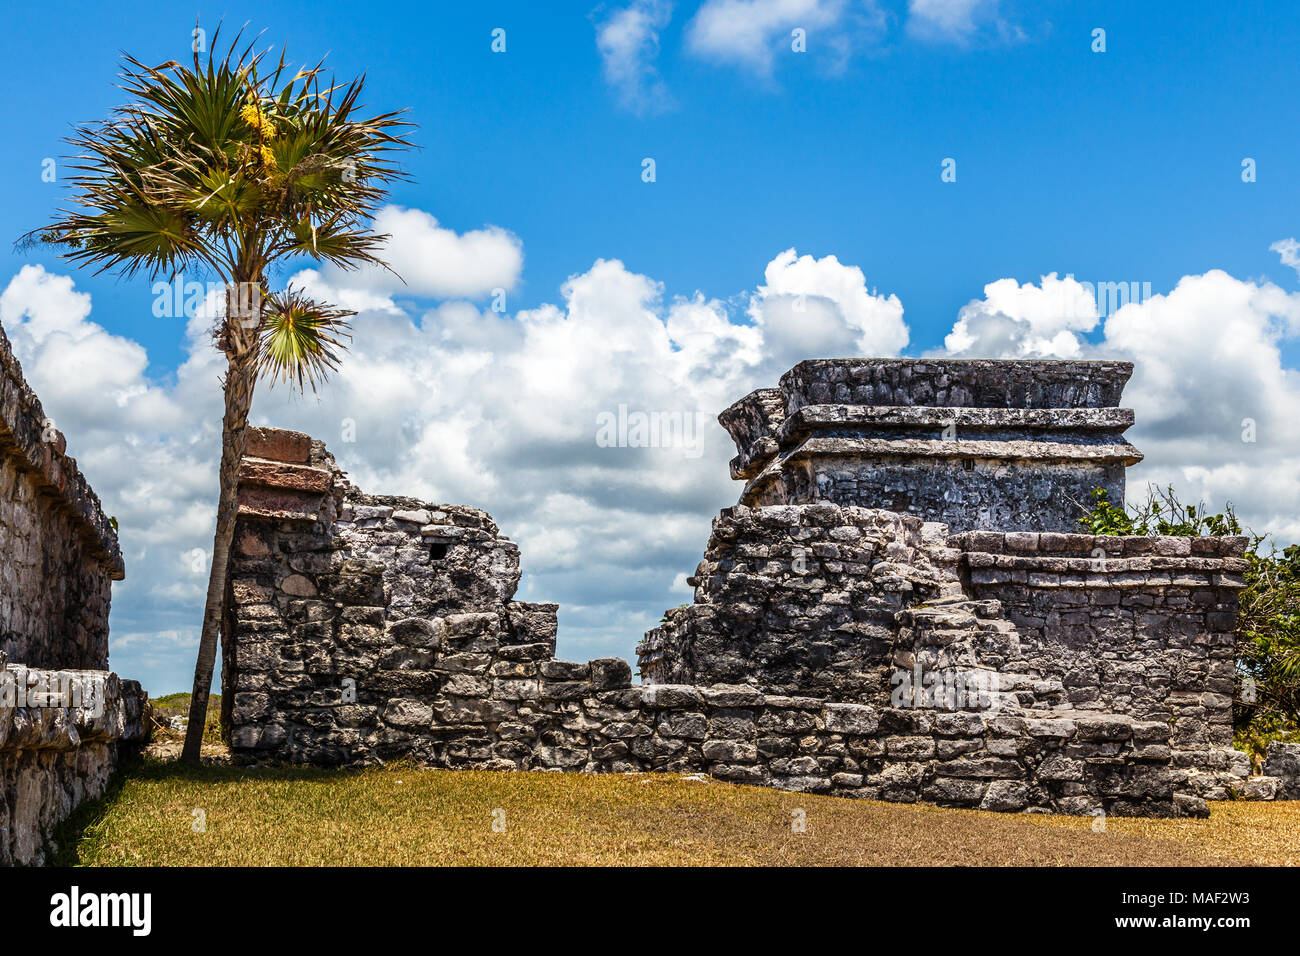 Old ruined ancient Mayan house with palm tree and blue sky, Tulum archaeological site, Yucatan peninsula, Mexico Stock Photo